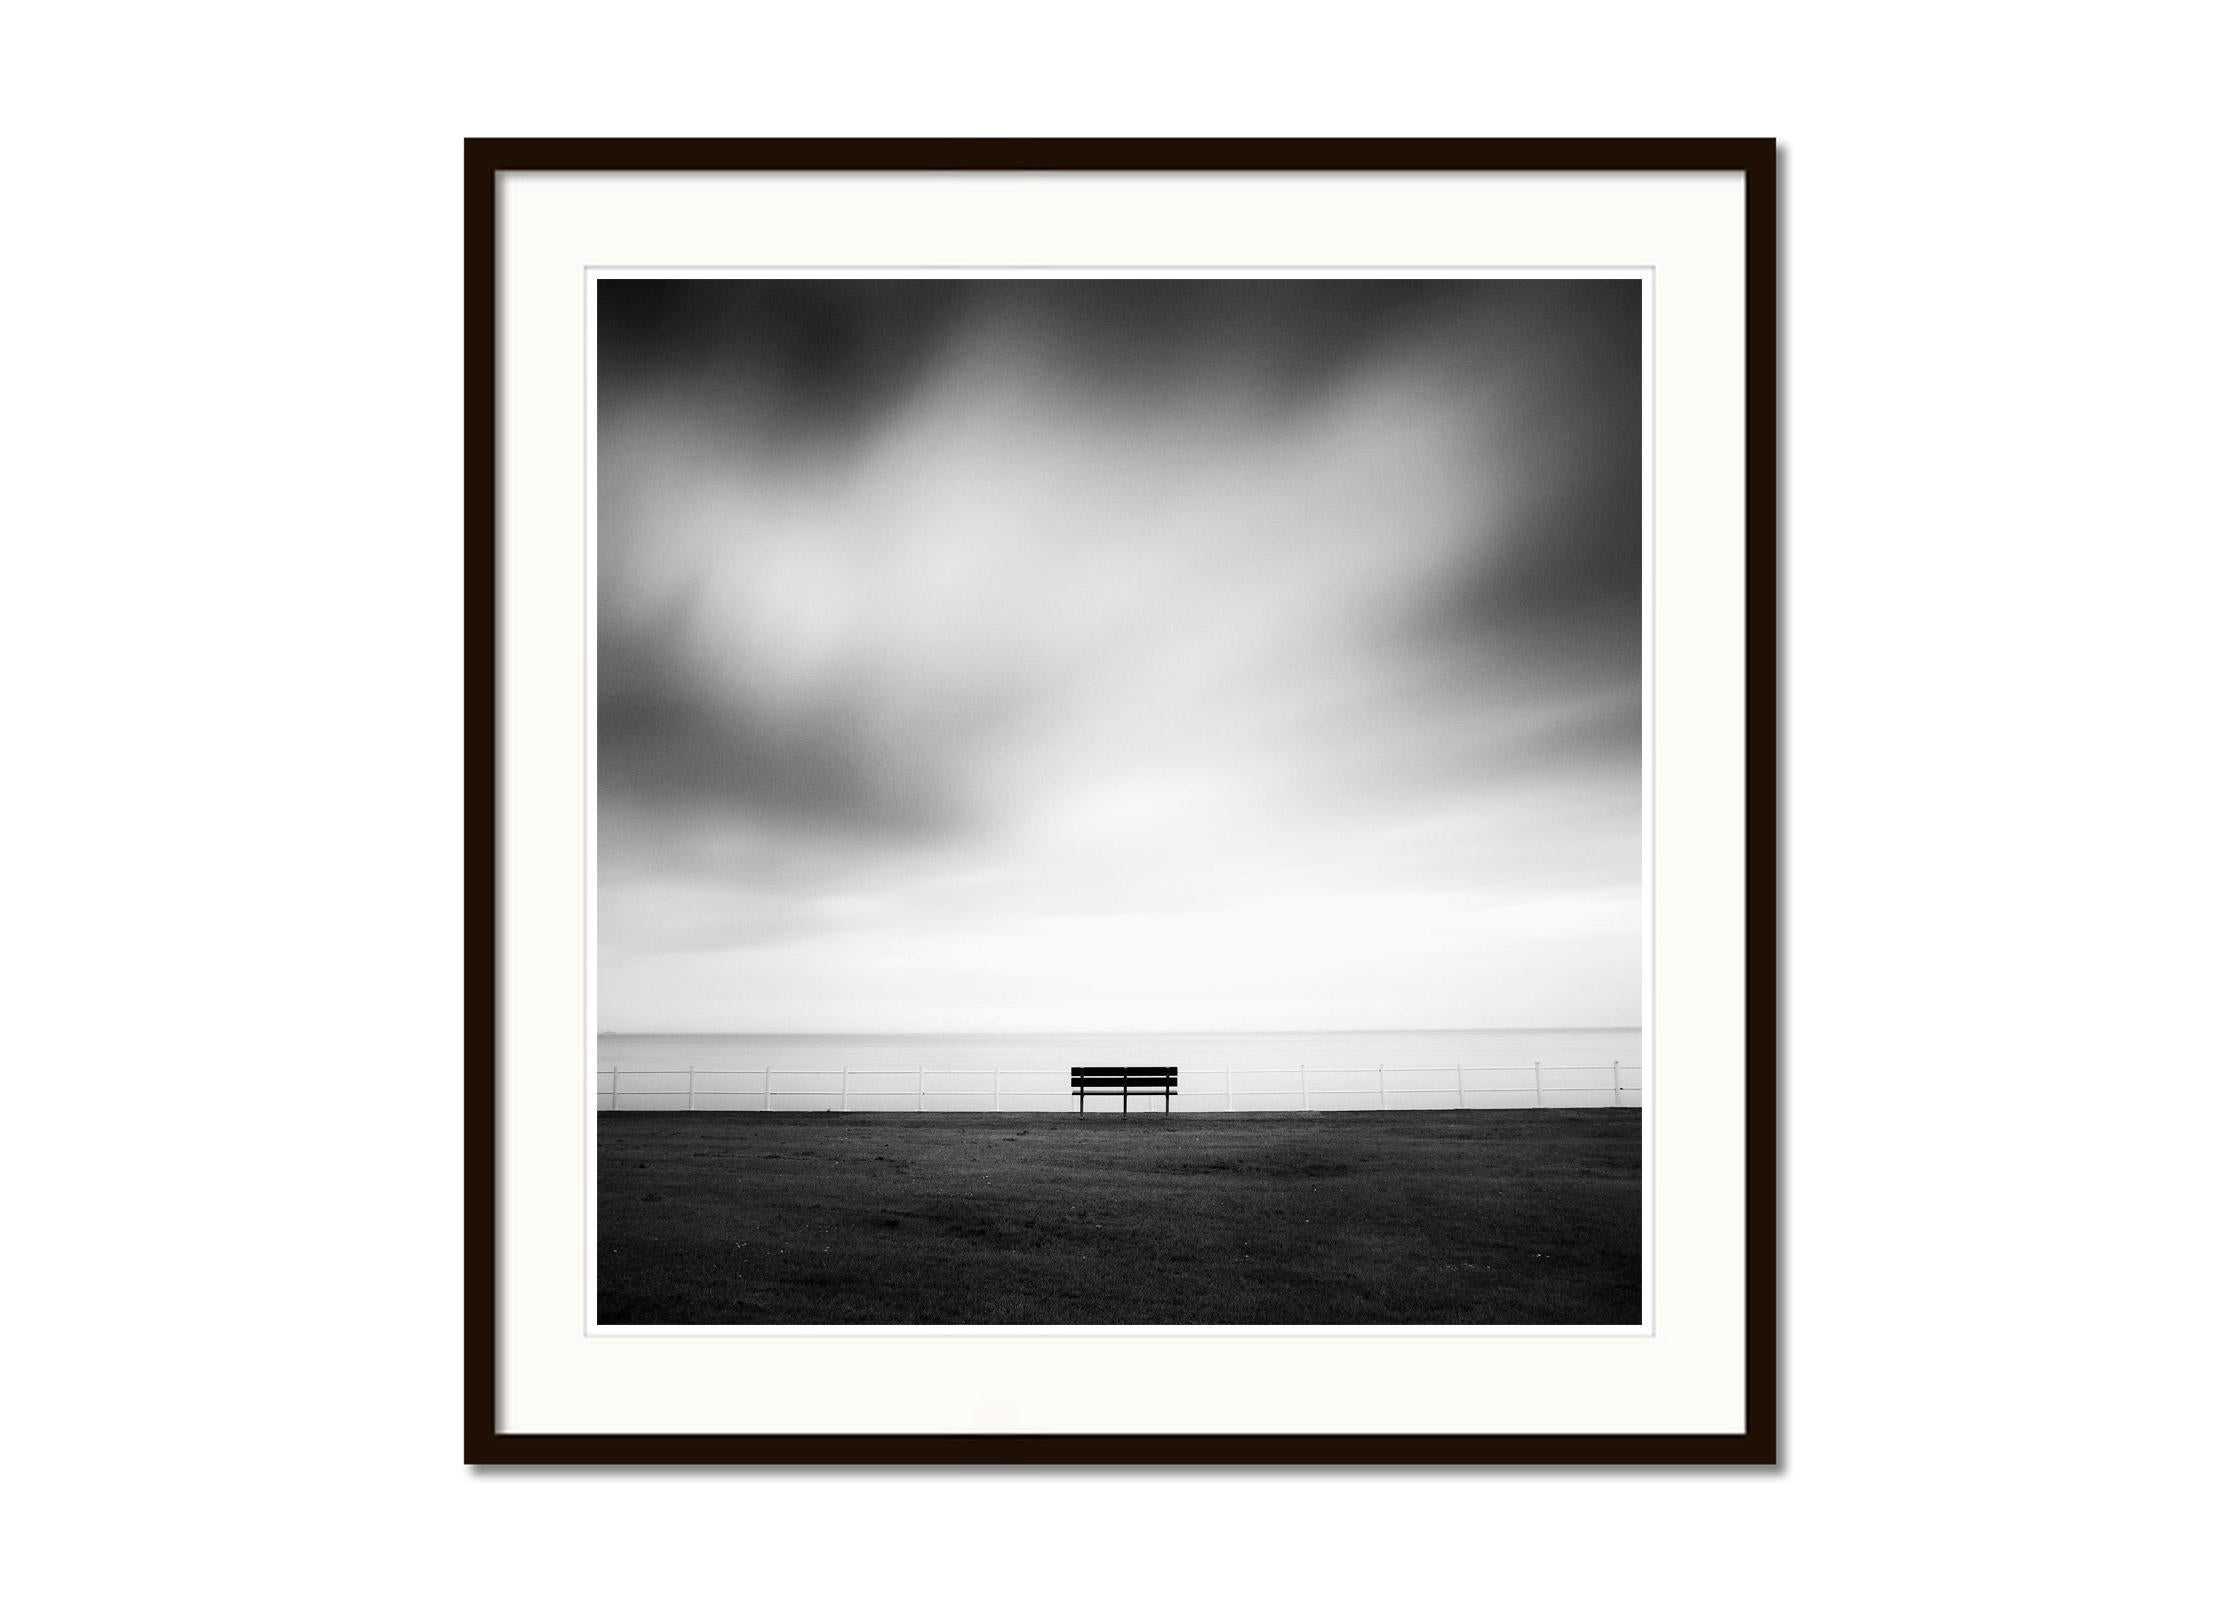 Quiet morning in the Park, seaside, Ireland black & white landscape photography - Gray Landscape Photograph by Gerald Berghammer